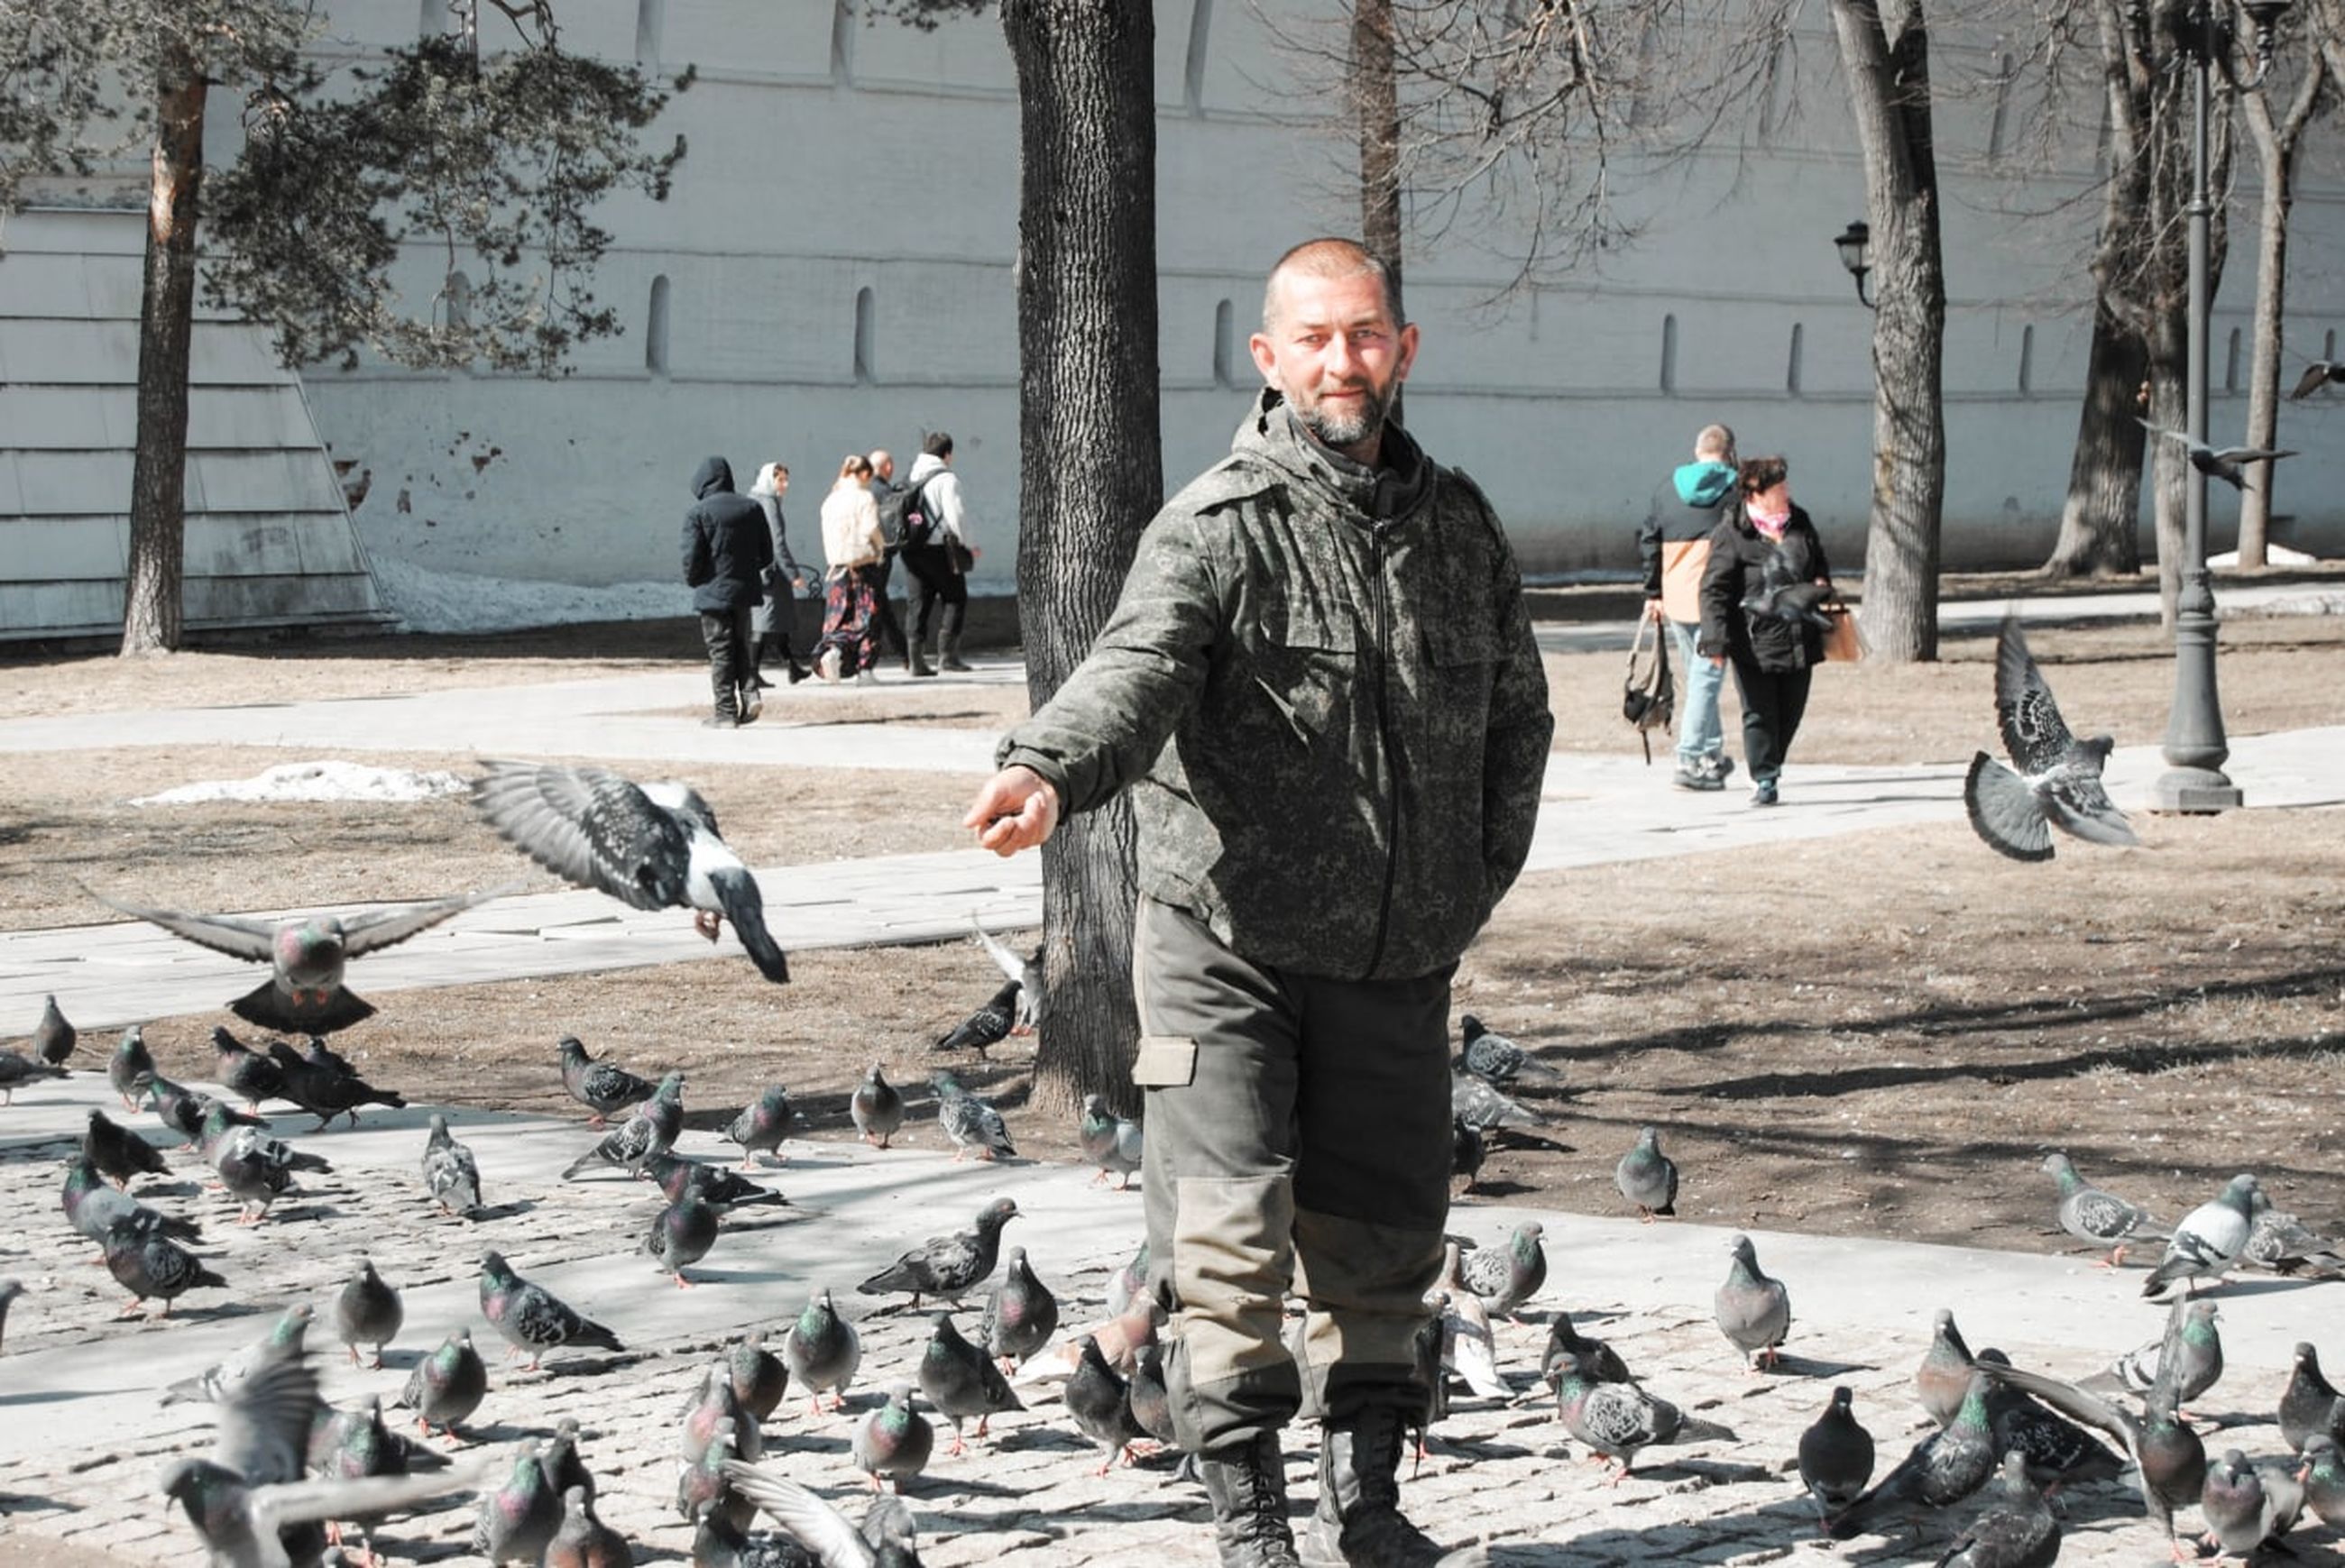 bird, men, adult, pigeons and doves, winter, animal, full length, architecture, pigeon, day, nature, government, city, animal themes, outdoors, street, one person, large group of animals, troop, clothing